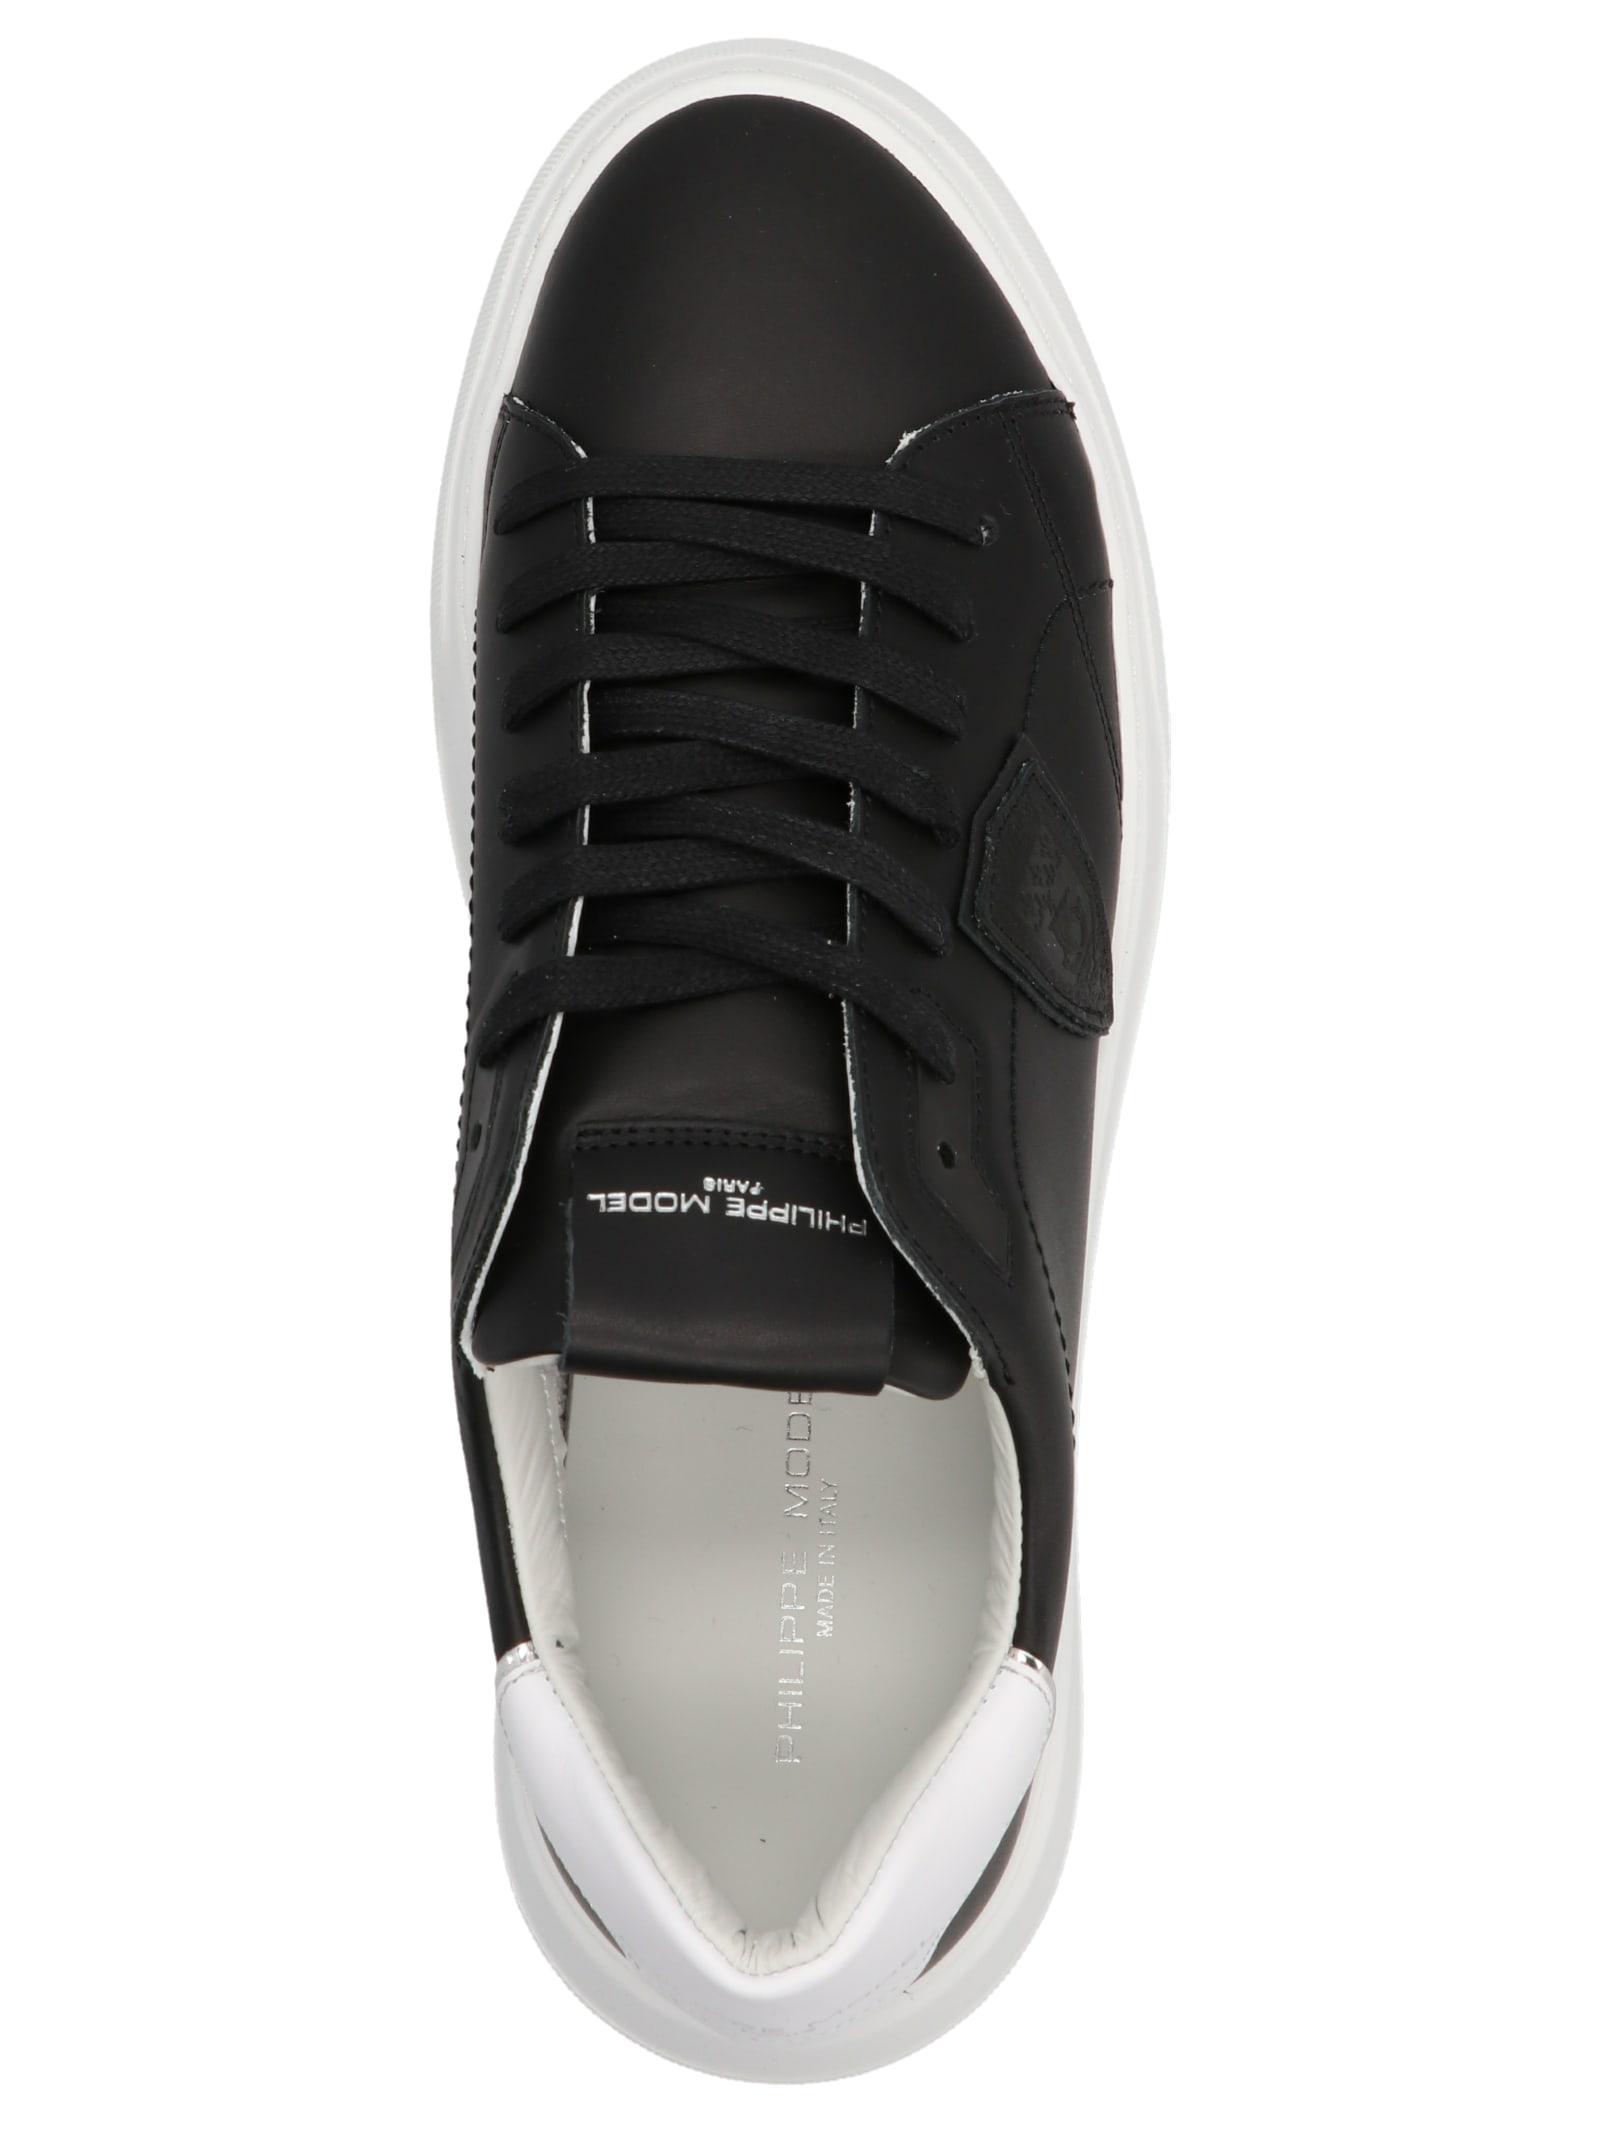 Philippe Model 'temple' Sneakers in Black for Men | Lyst